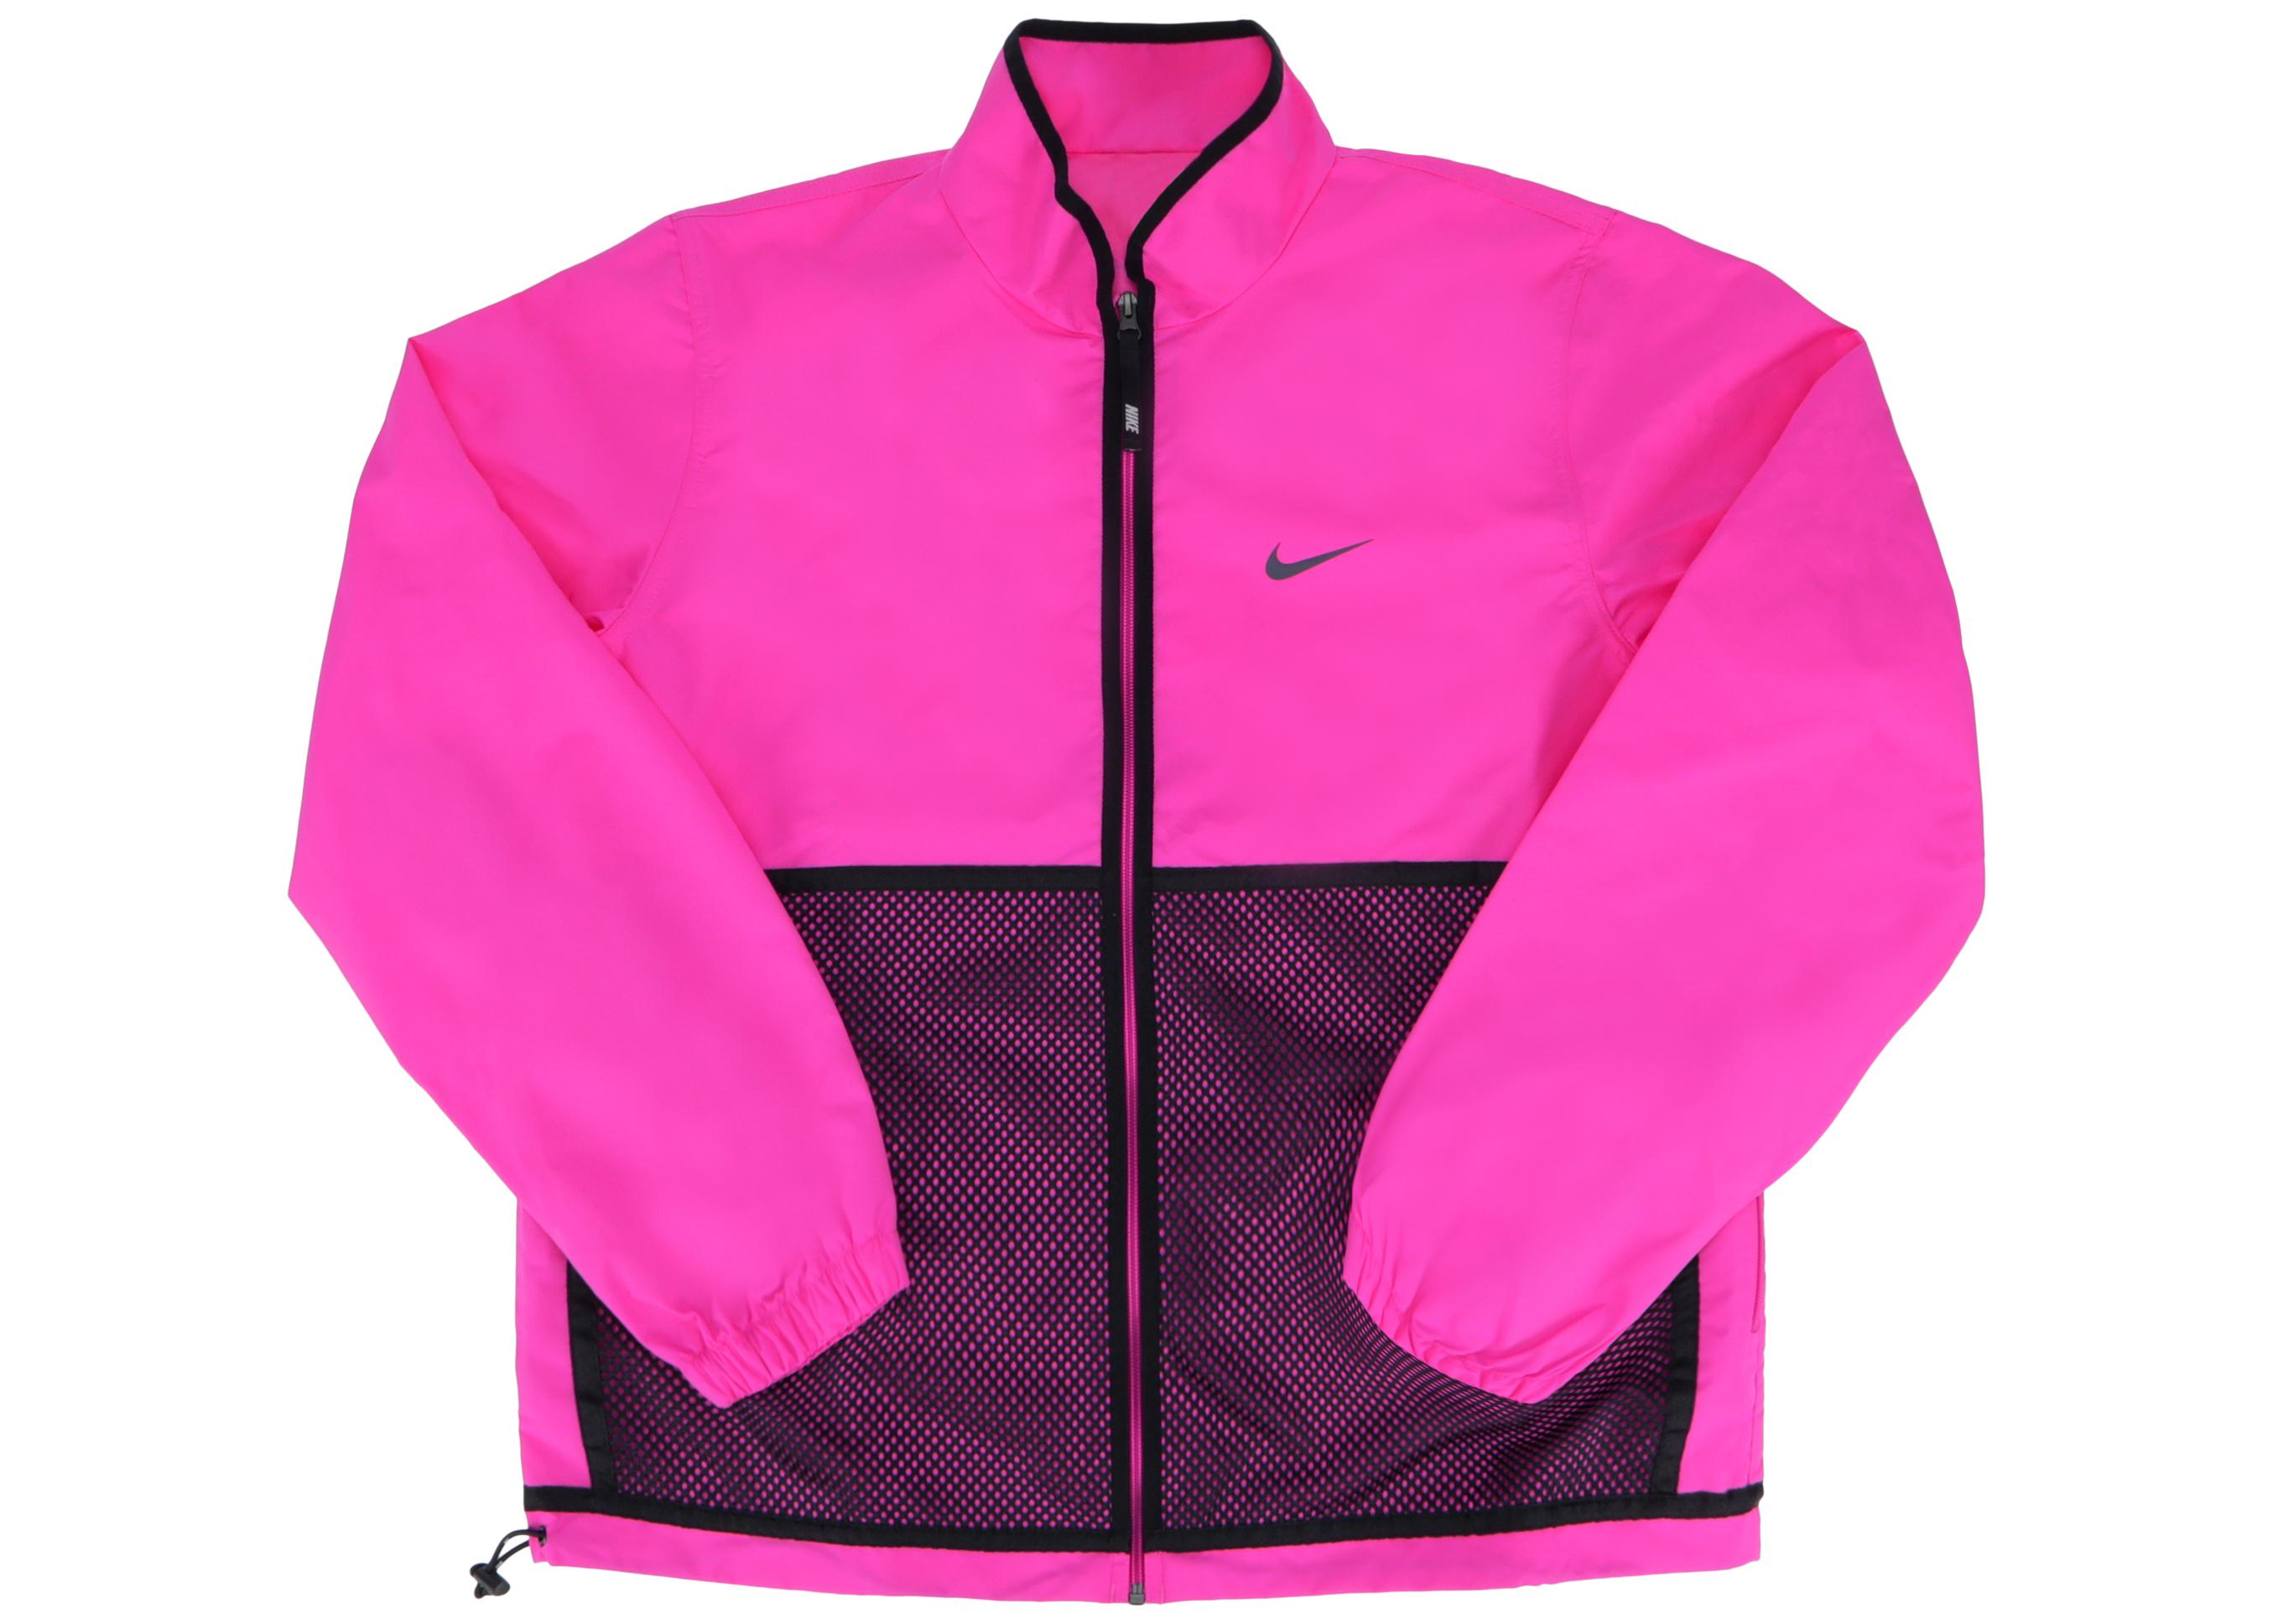 Lyst - Supreme Nike Trail Running Jacket Pink in Pink for Men